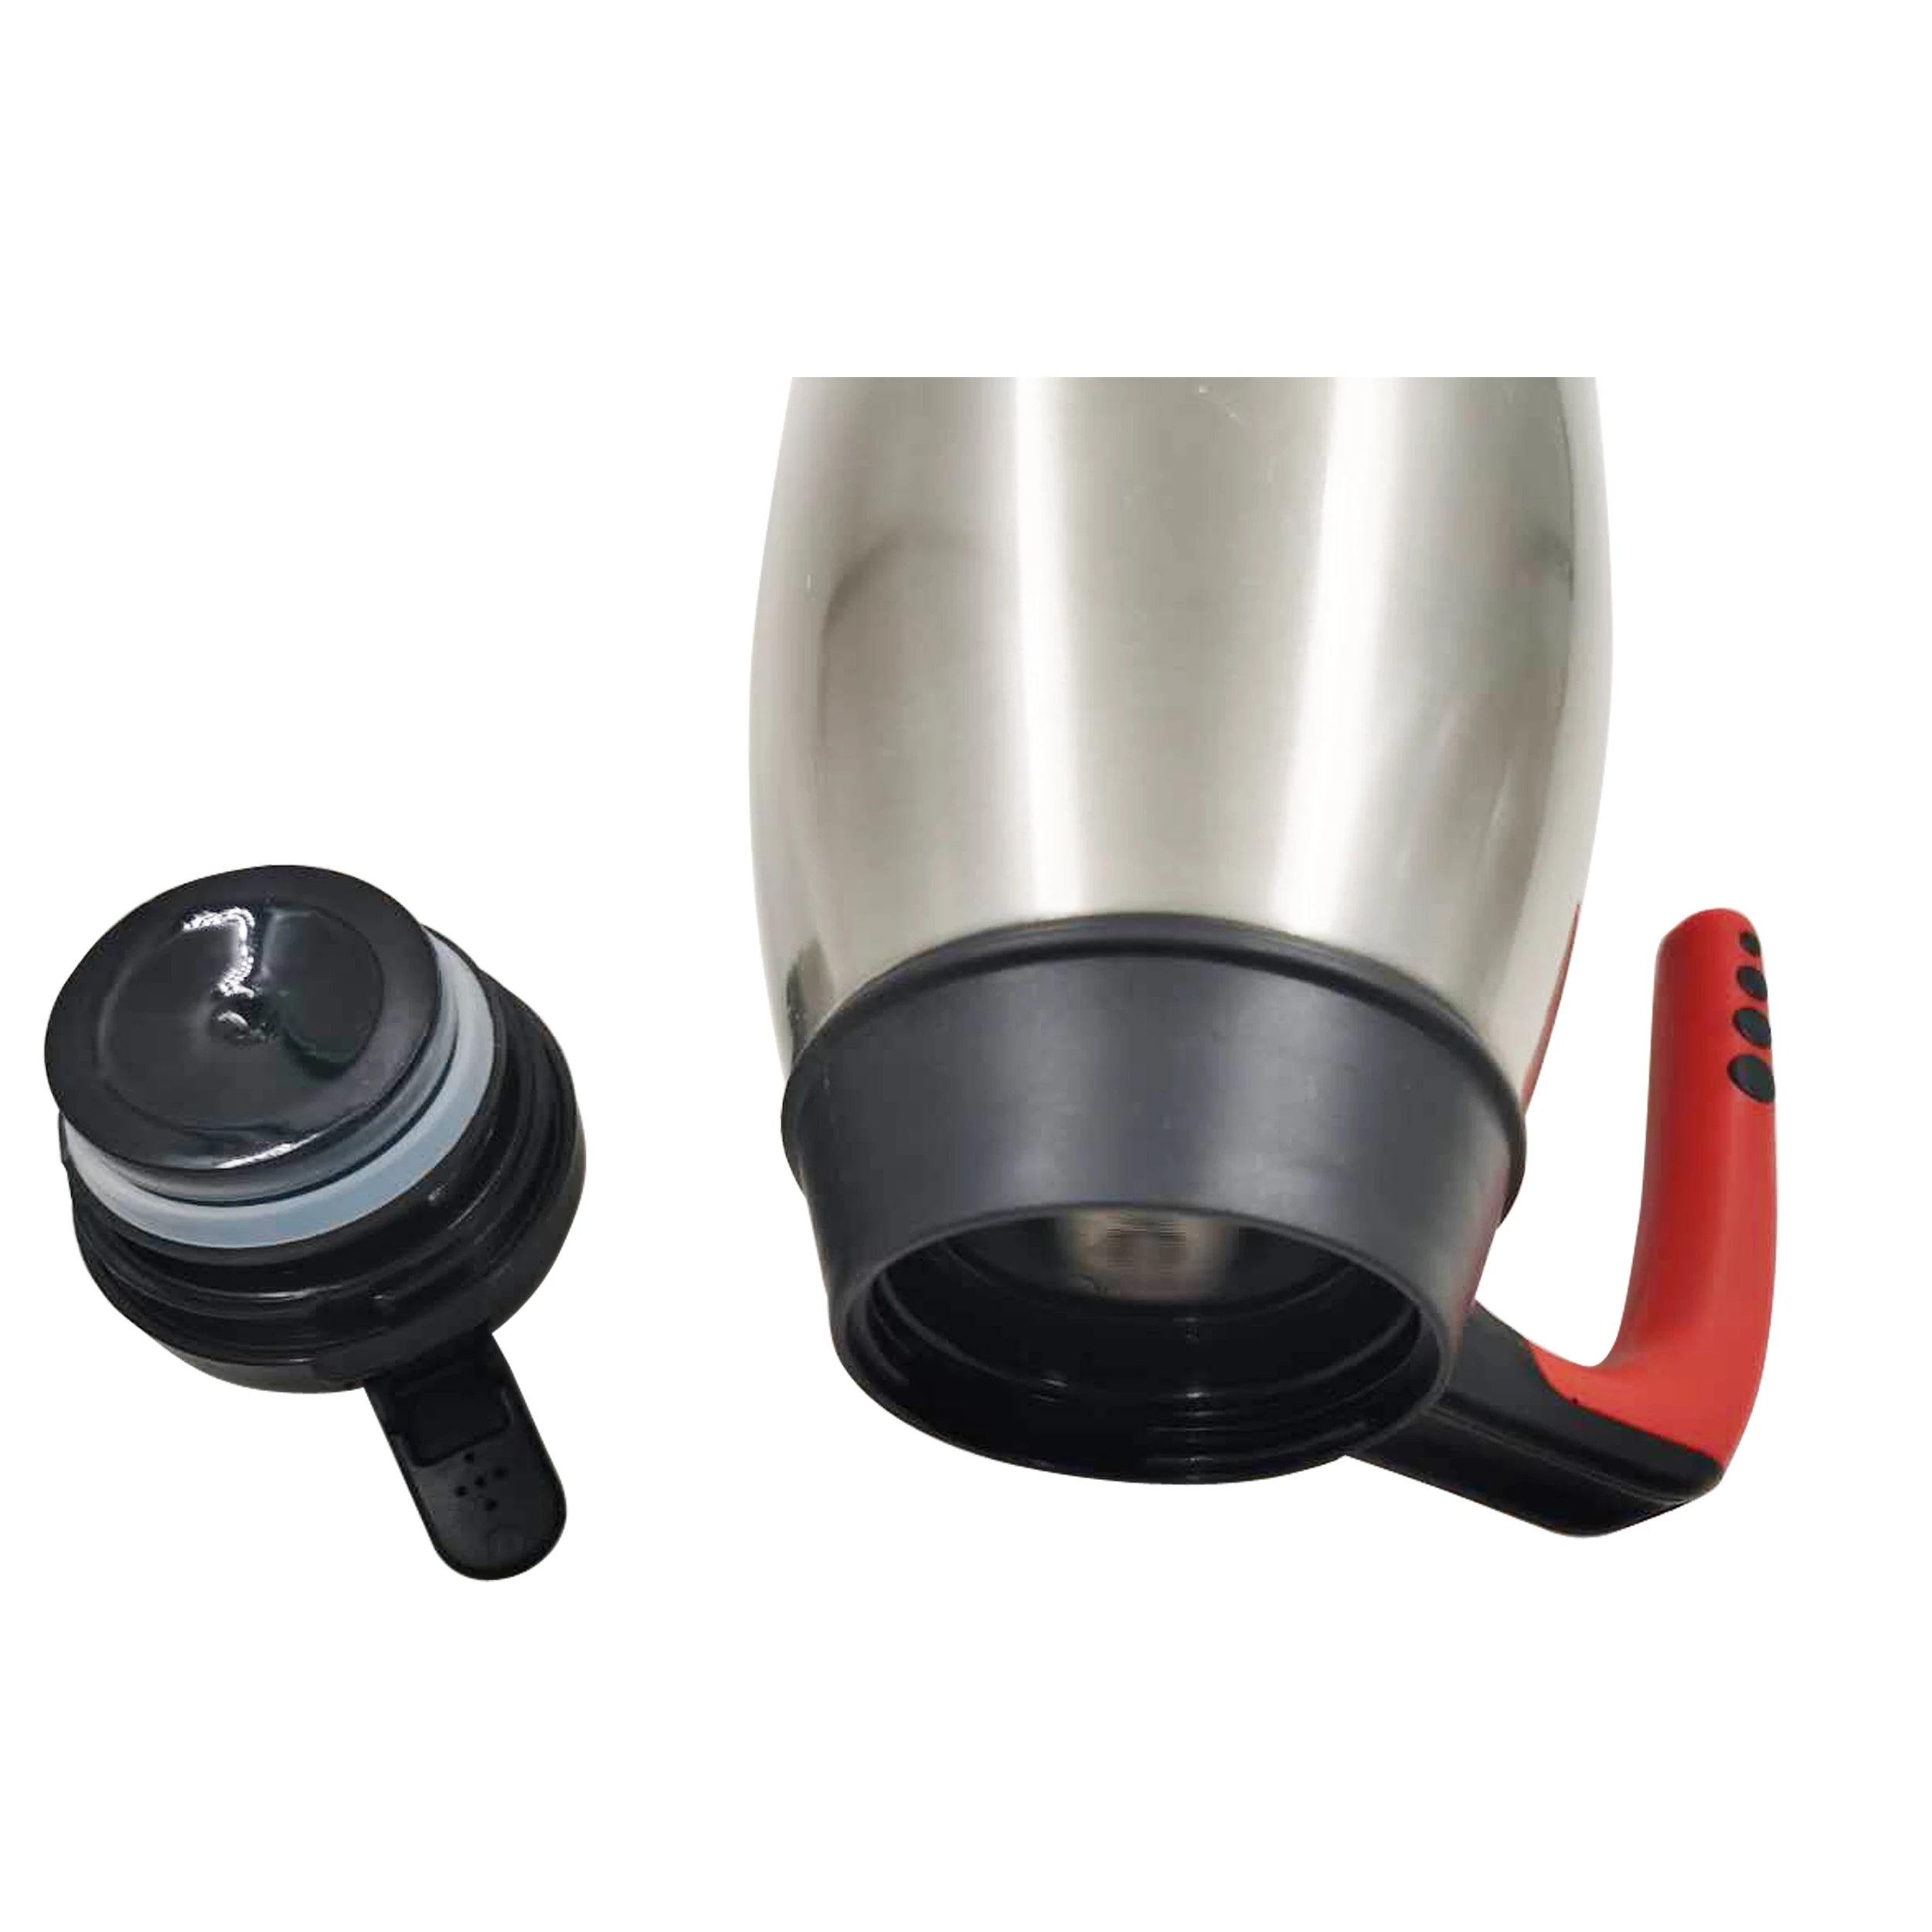 
Top selling 304 stainless steel insulated water pot insulated water kettles 